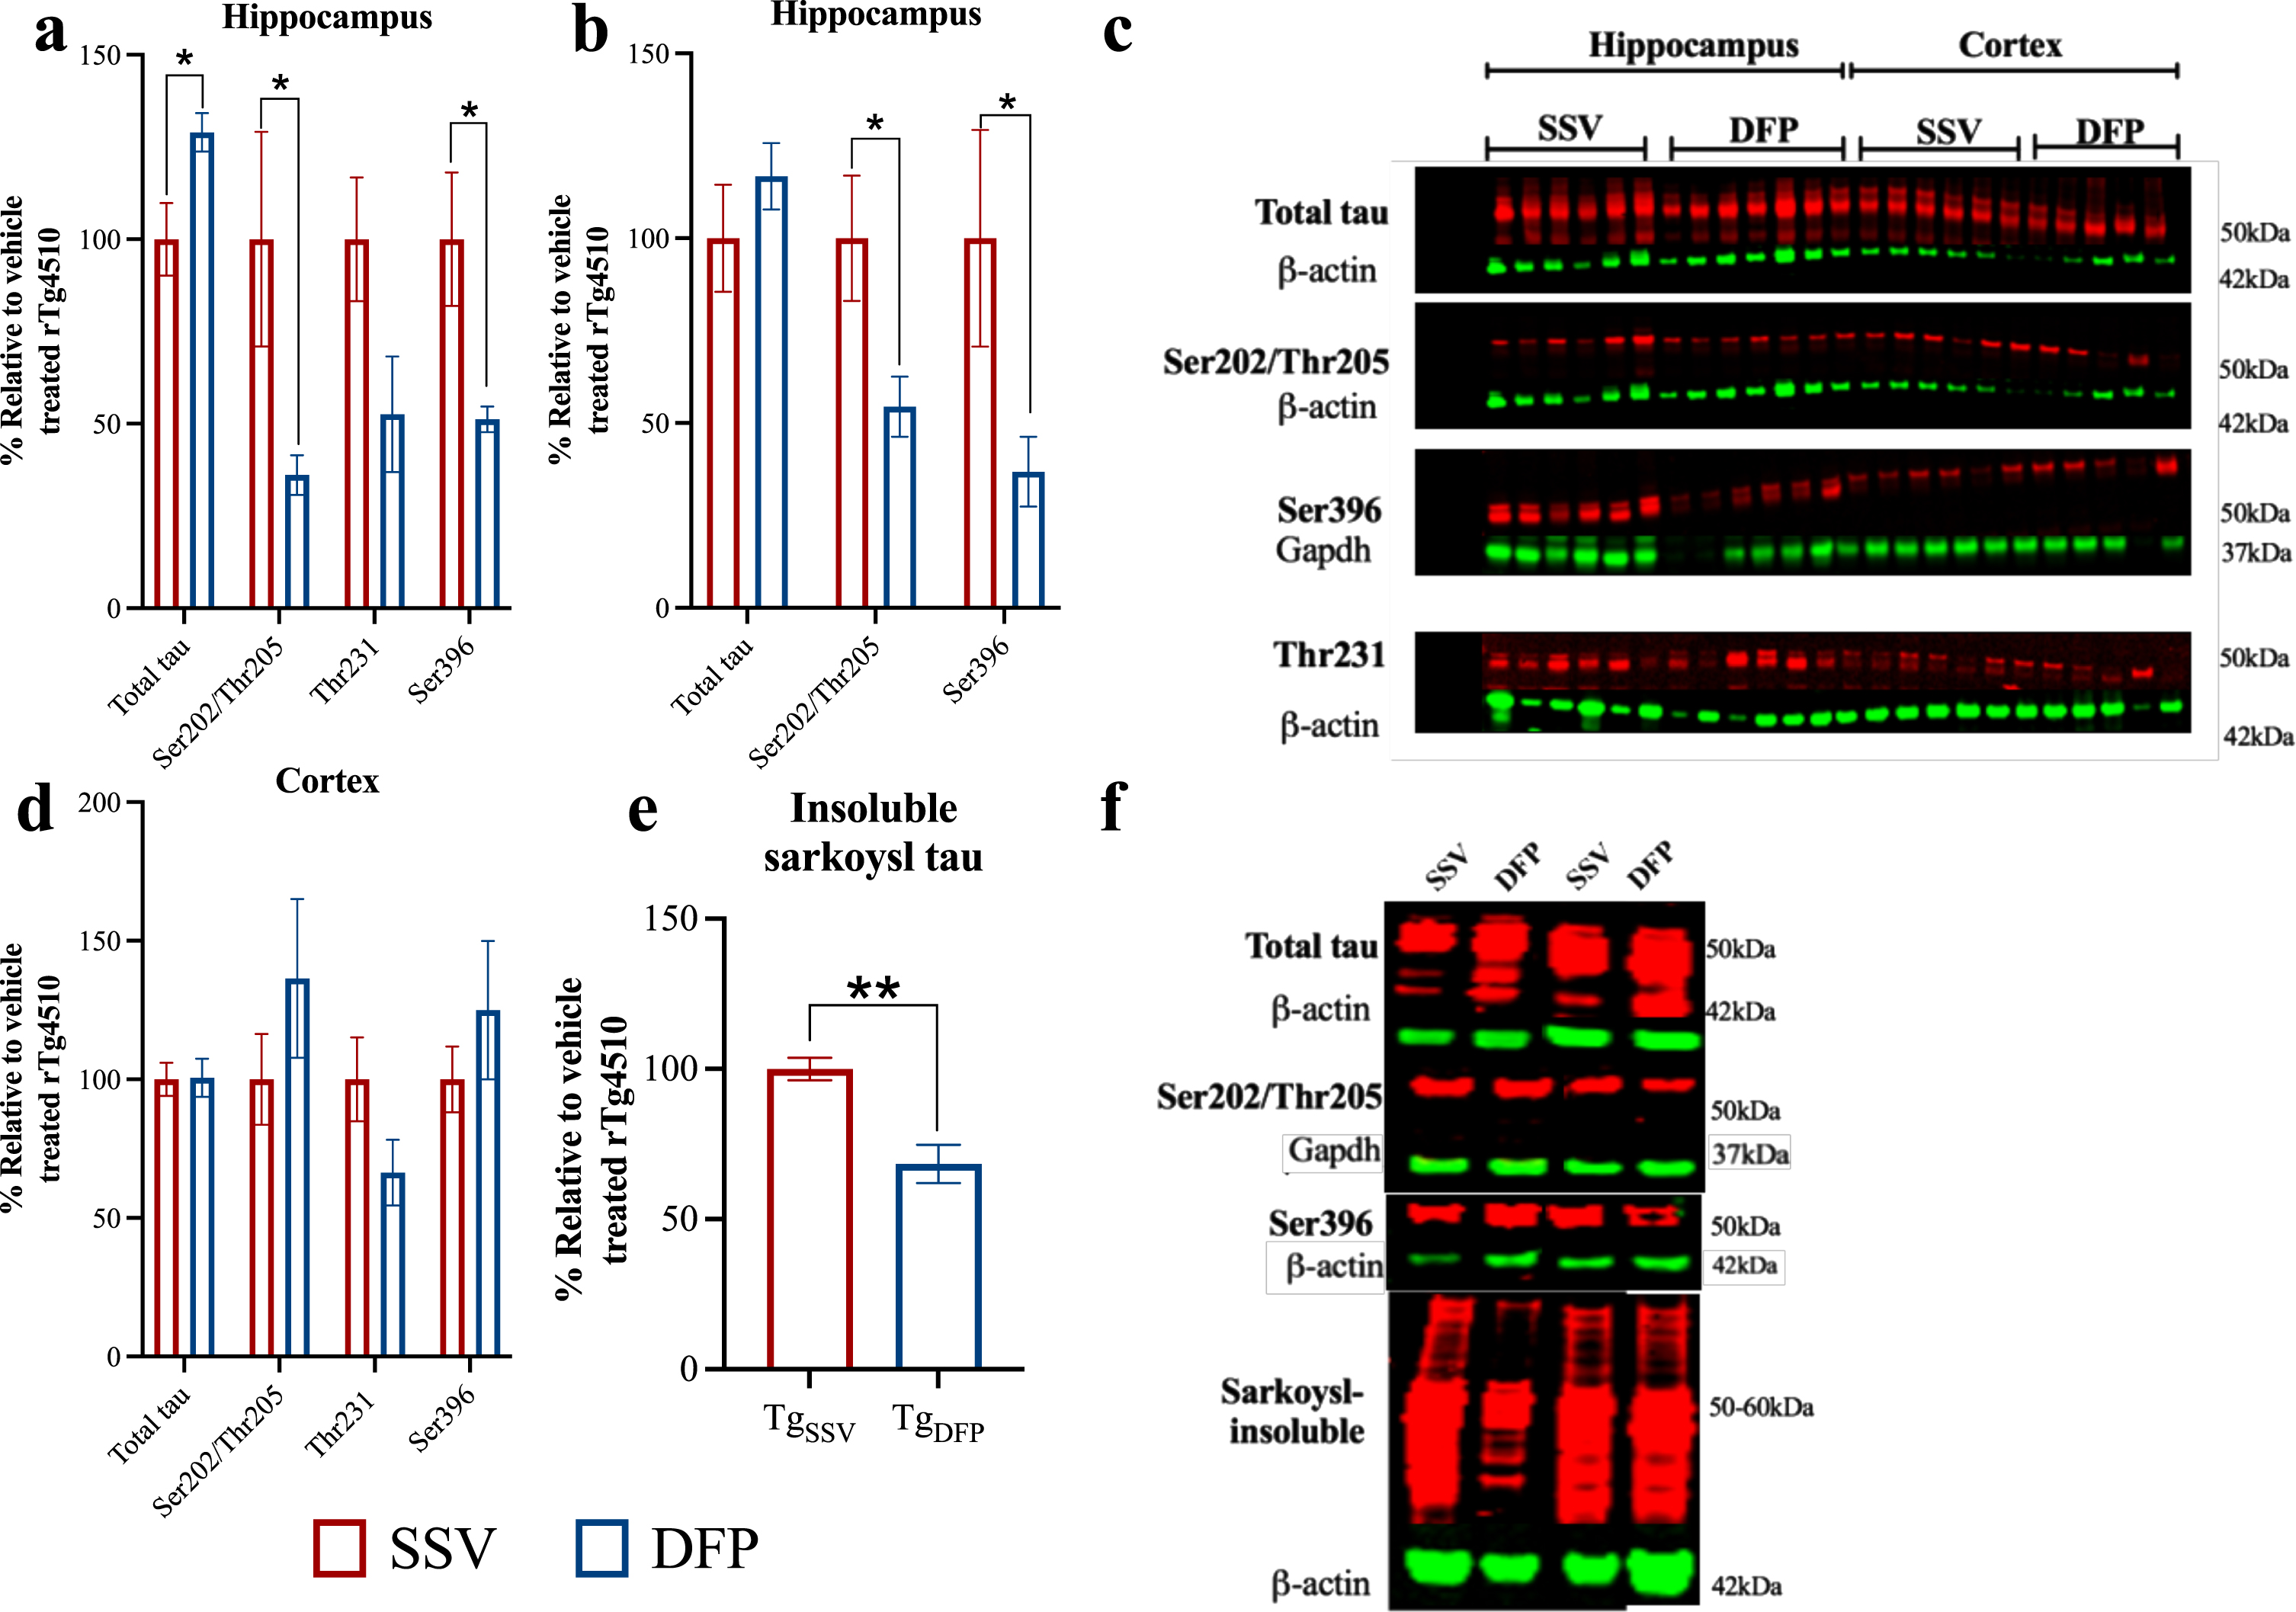 Effect of DFP on tau phosphorylation. Western blot was used to examine total tau and phosphorylated tau levels (expressed as a ratio to total tau levels) in the hippocampus in the soluble (a) and insoluble (b) fractions, (d) soluble tau levels in the cortex, and (e) sarkosyl-insoluble total tau within the cortex. (c) and (f) are representative western blot images of soluble and insoluble tau respectively (note, antibodies may have been probed on the same blot or on stripped blots). Vehicle treated rTg4510 = TgSSV; DFP treated rTg4510 = TgDFP. Unpaired t-test; Error bars represent±SEM. *p < 0.05, **p < 0.01. n = 5– 6/group.